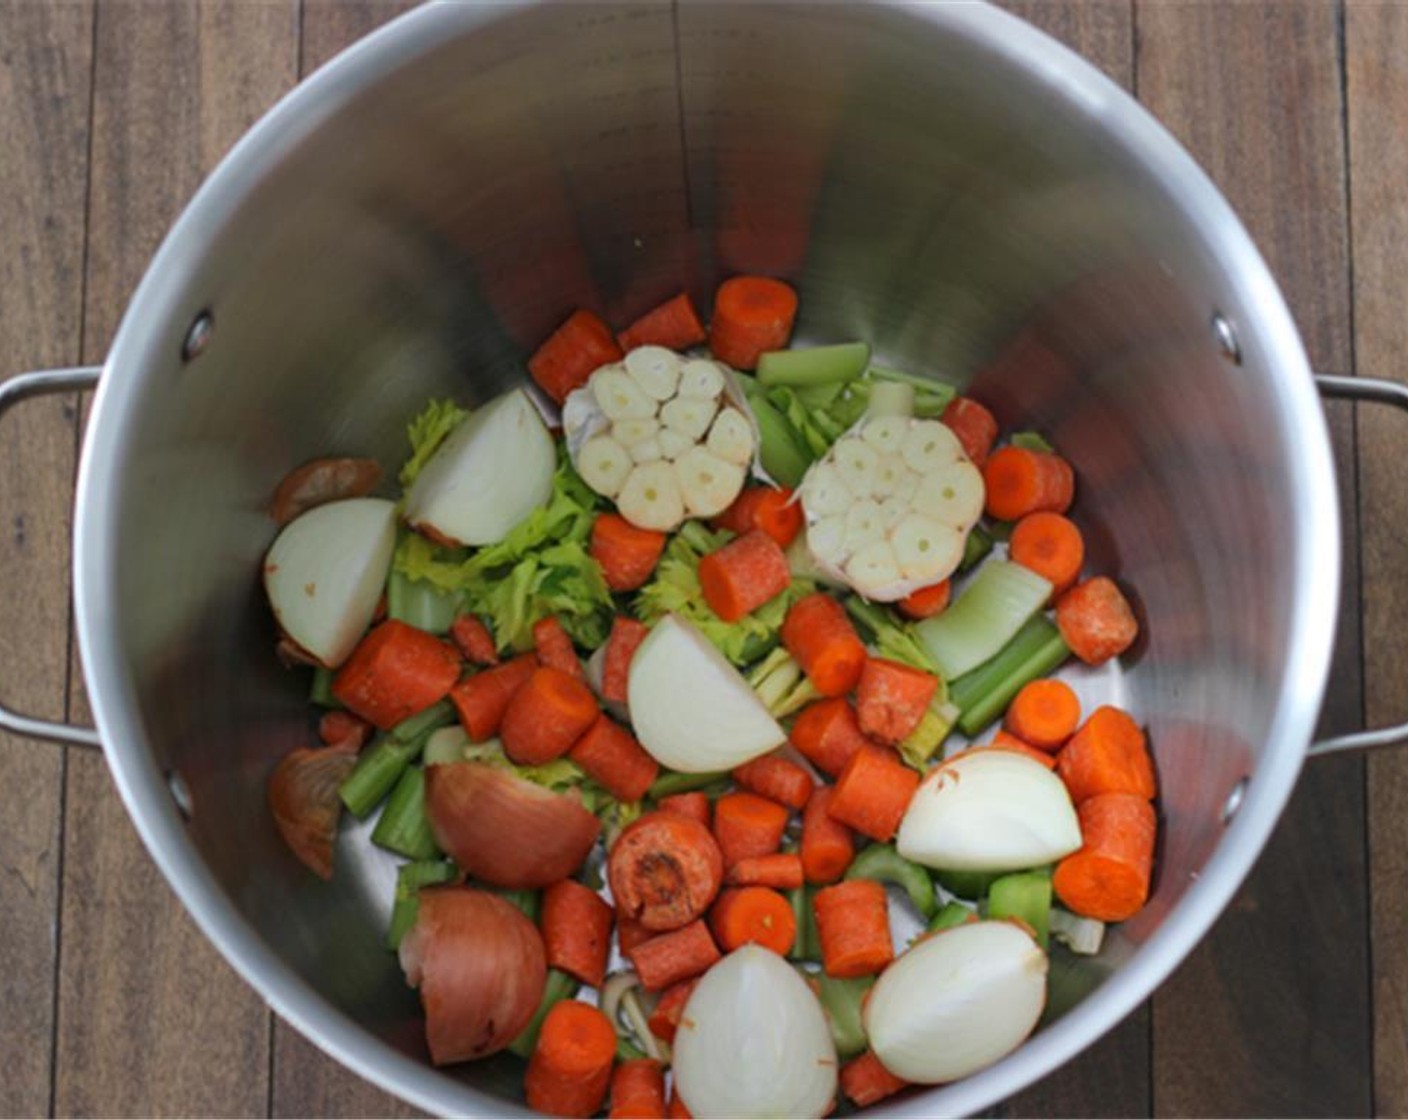 step 2 Cut Onions (2) into quarters and place them in a 16 quart stockpot with the onion peels. The peels help to give a nice brown color to the stock. Coarsely chop the carrots and celery, cut the  Garlic (1 bulb) in half and place them all in the stockpot.